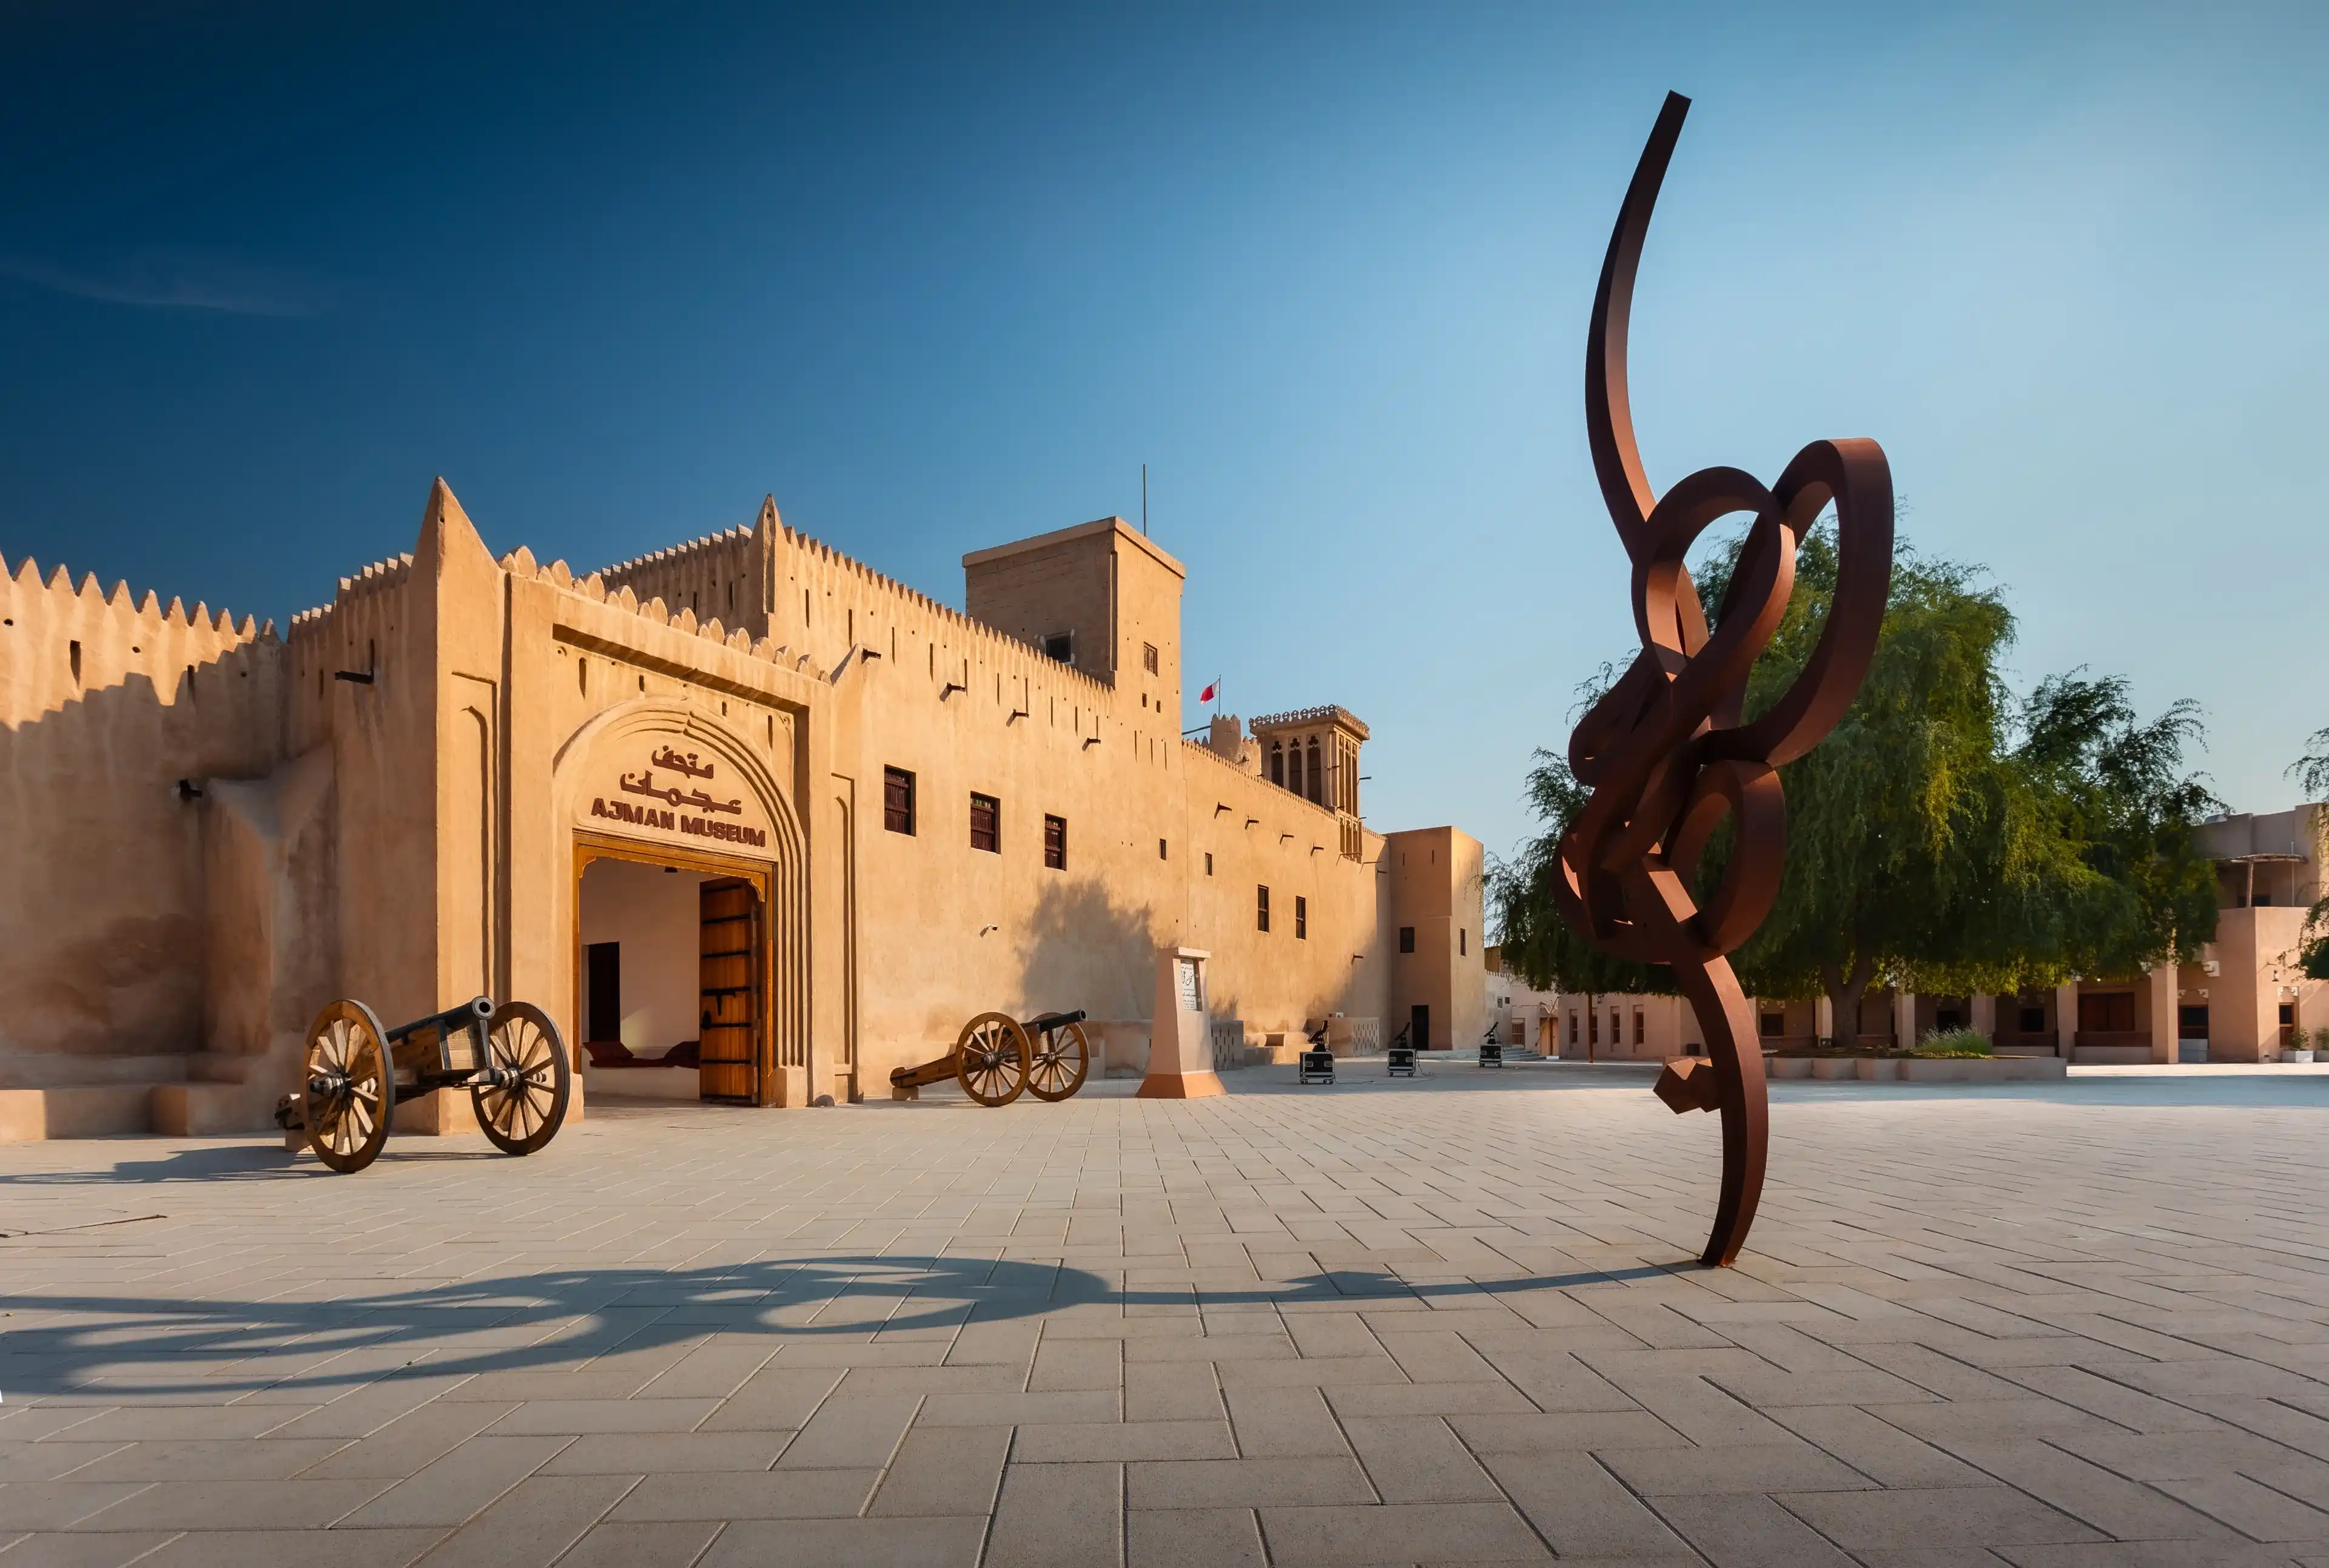 AJMAN, UAE, December 12, 2022: MUSEUM OF AJMAN gate during the afternoon with a calligraphic statue of ajman city and old ancient wooden cannons on the door